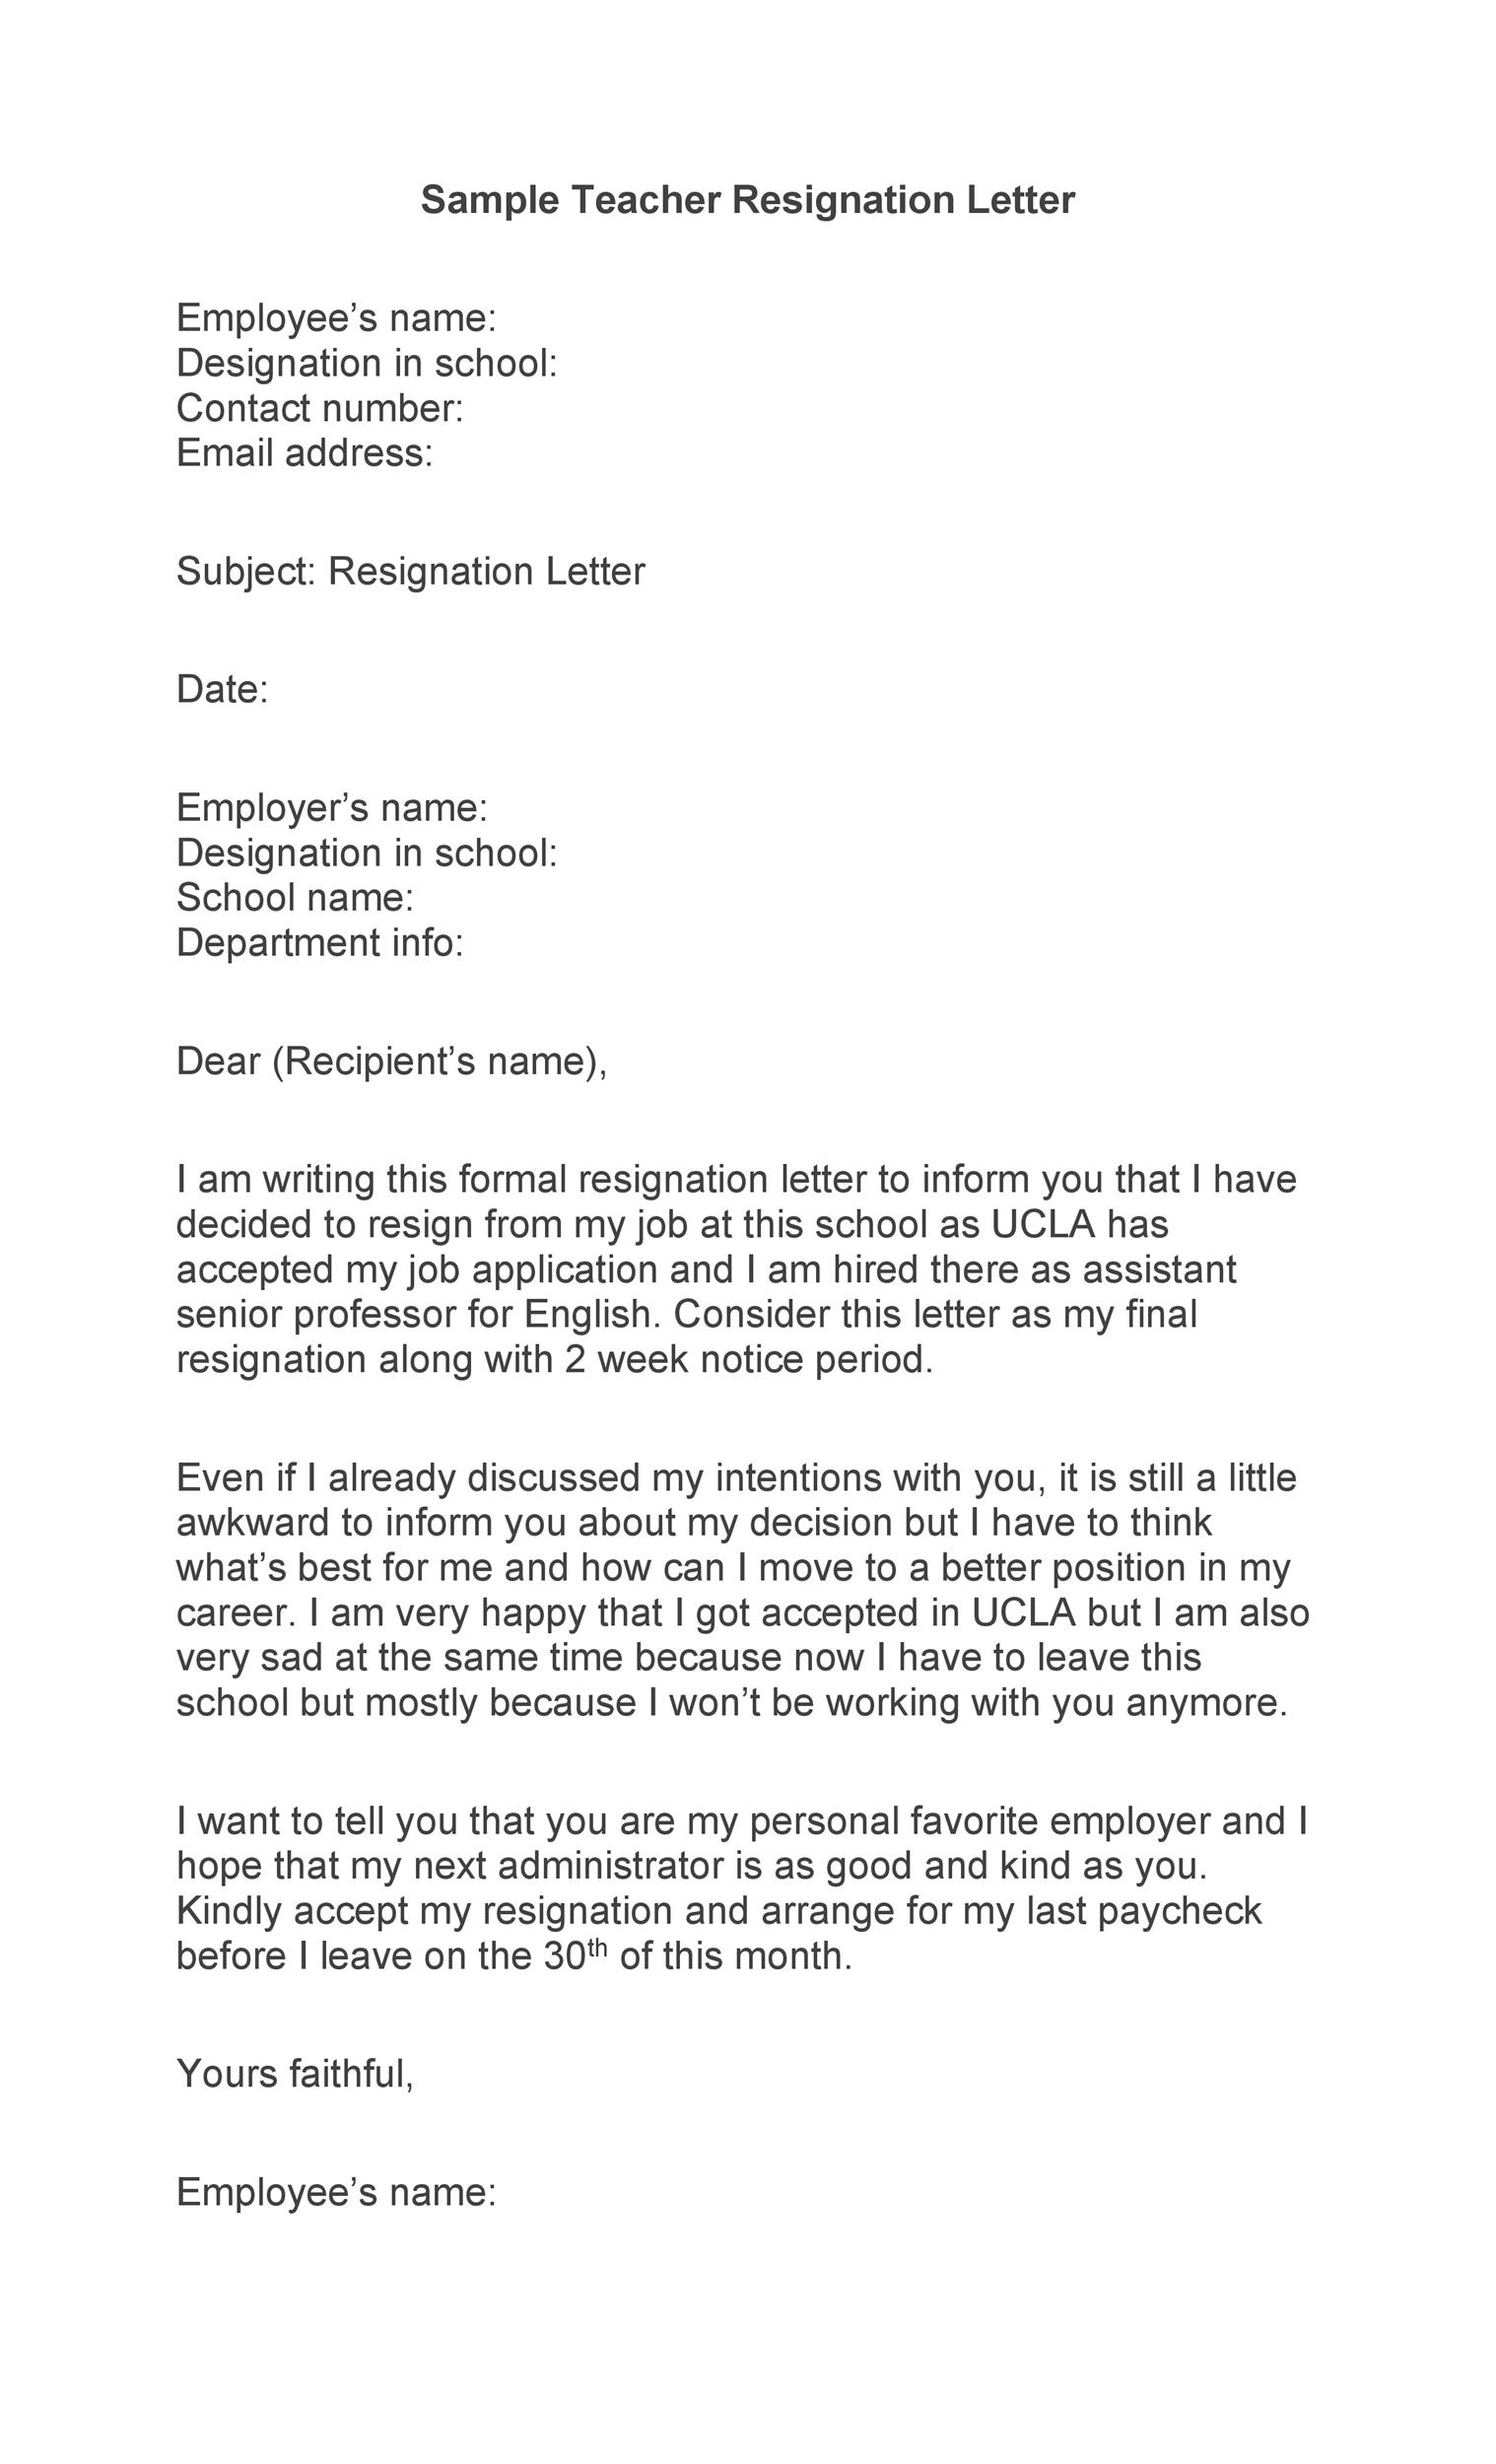 Resignation Letter Examples With Reasons from templatelab.com